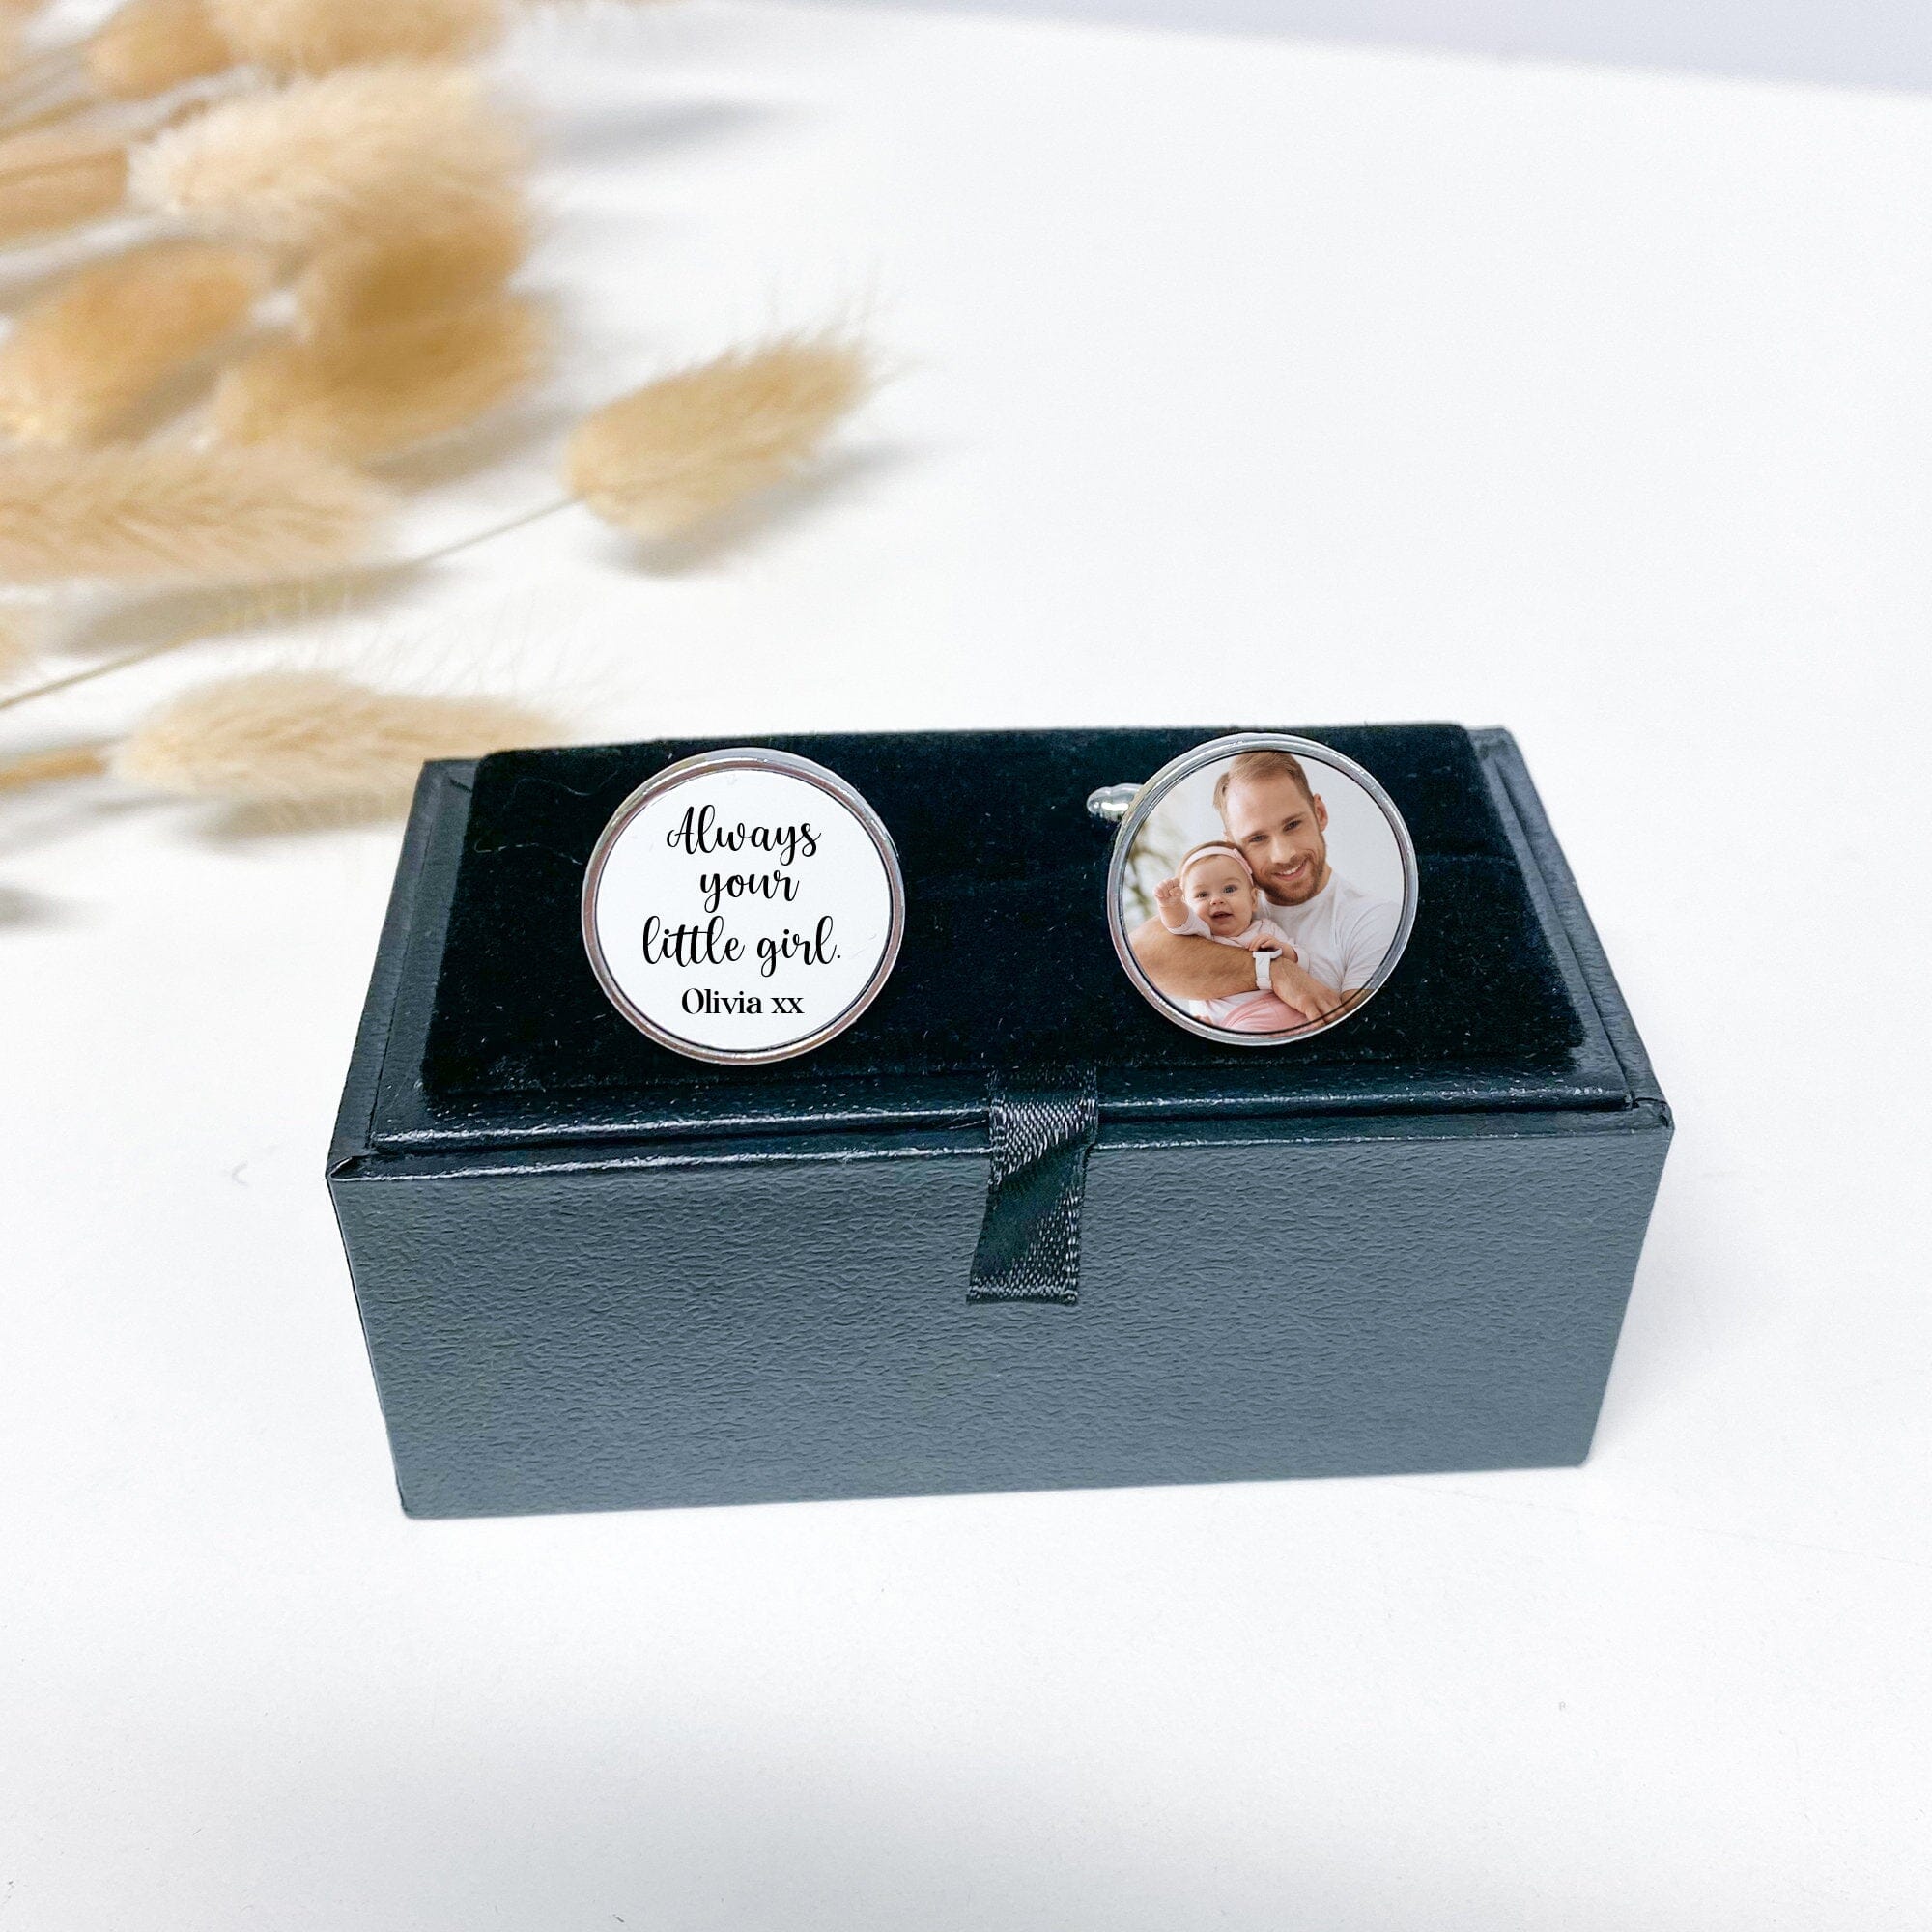 Cufflinks With Photo, Wedding Gift For Father Of The Bride, Wedding Cufflinks, Printed Cufflinks, Gift For Dad